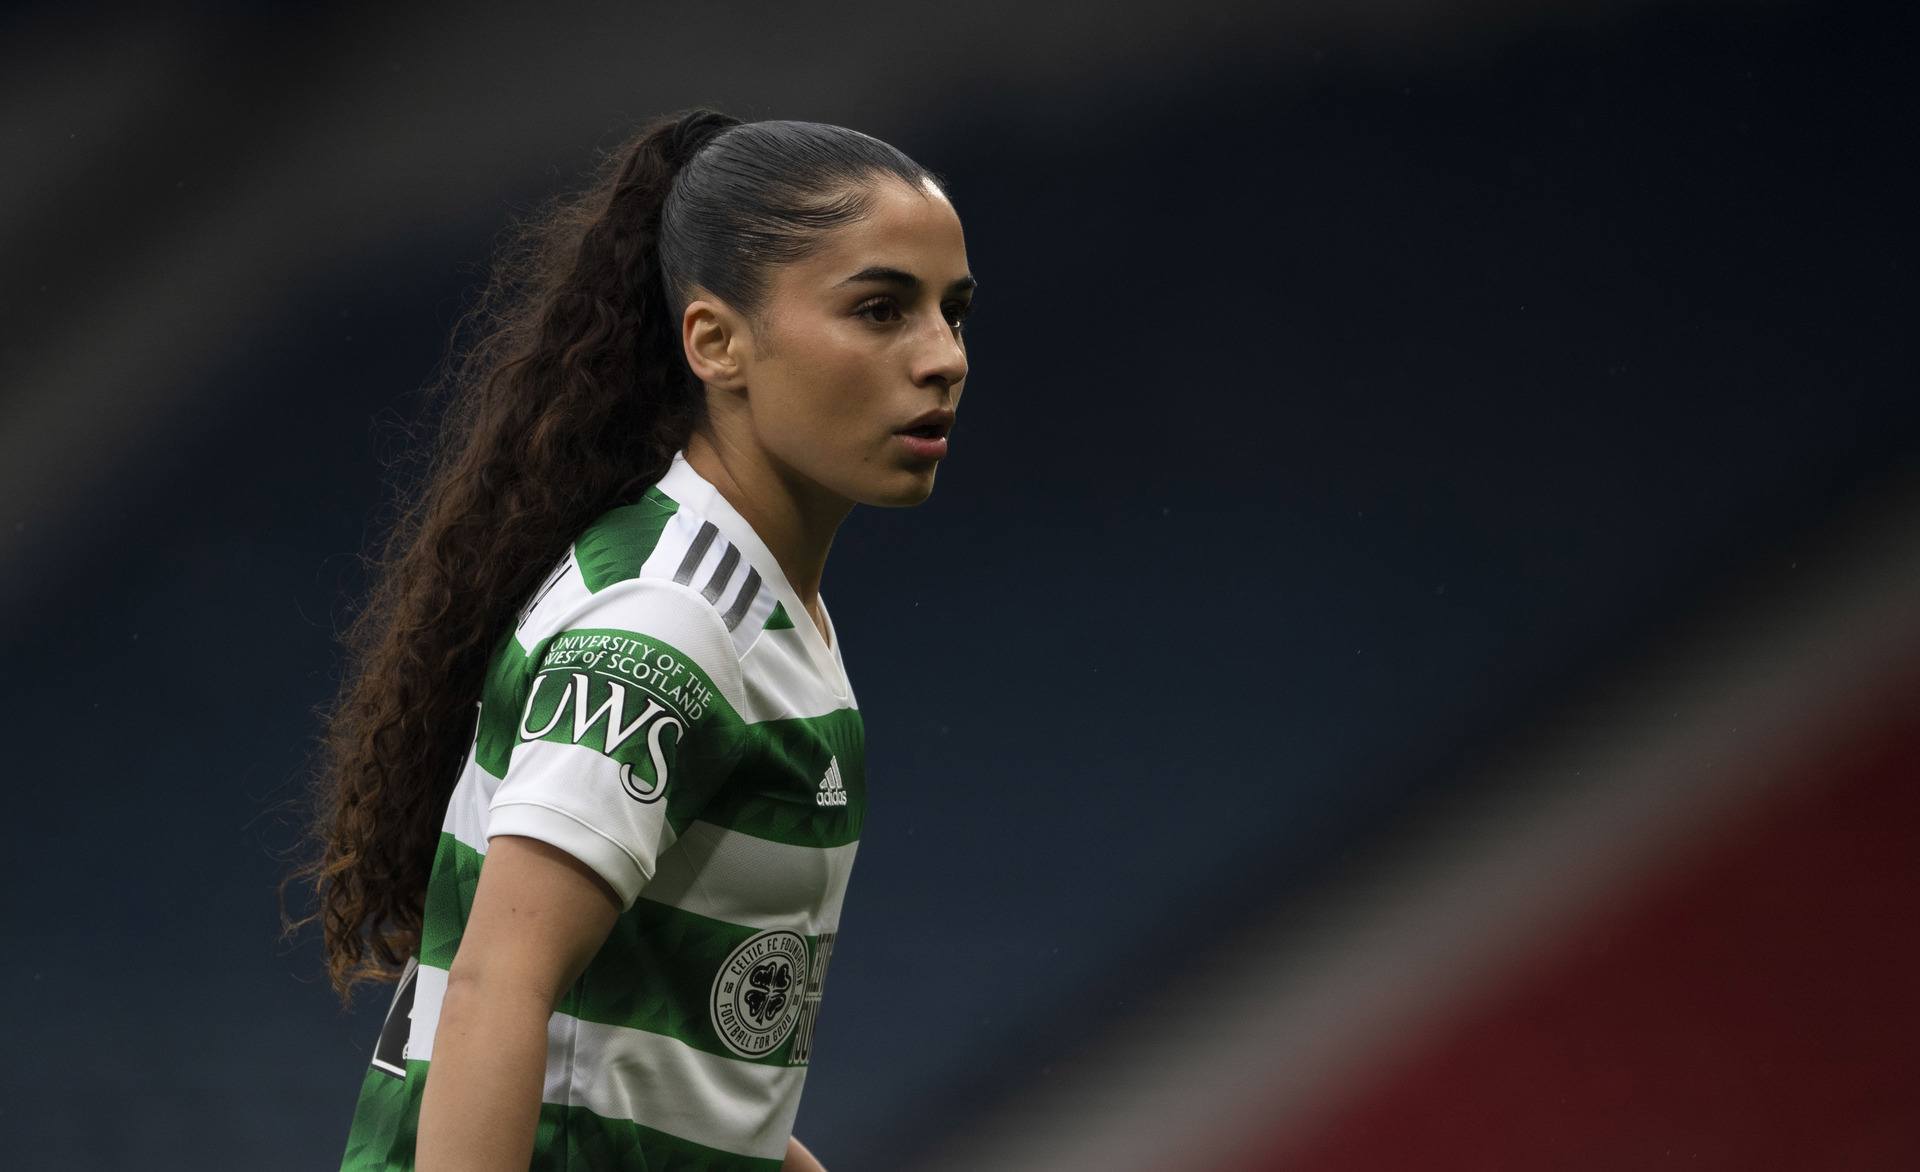 Jacynta Galabadaarachchi is hoping to hep Celtic to first women's title. 